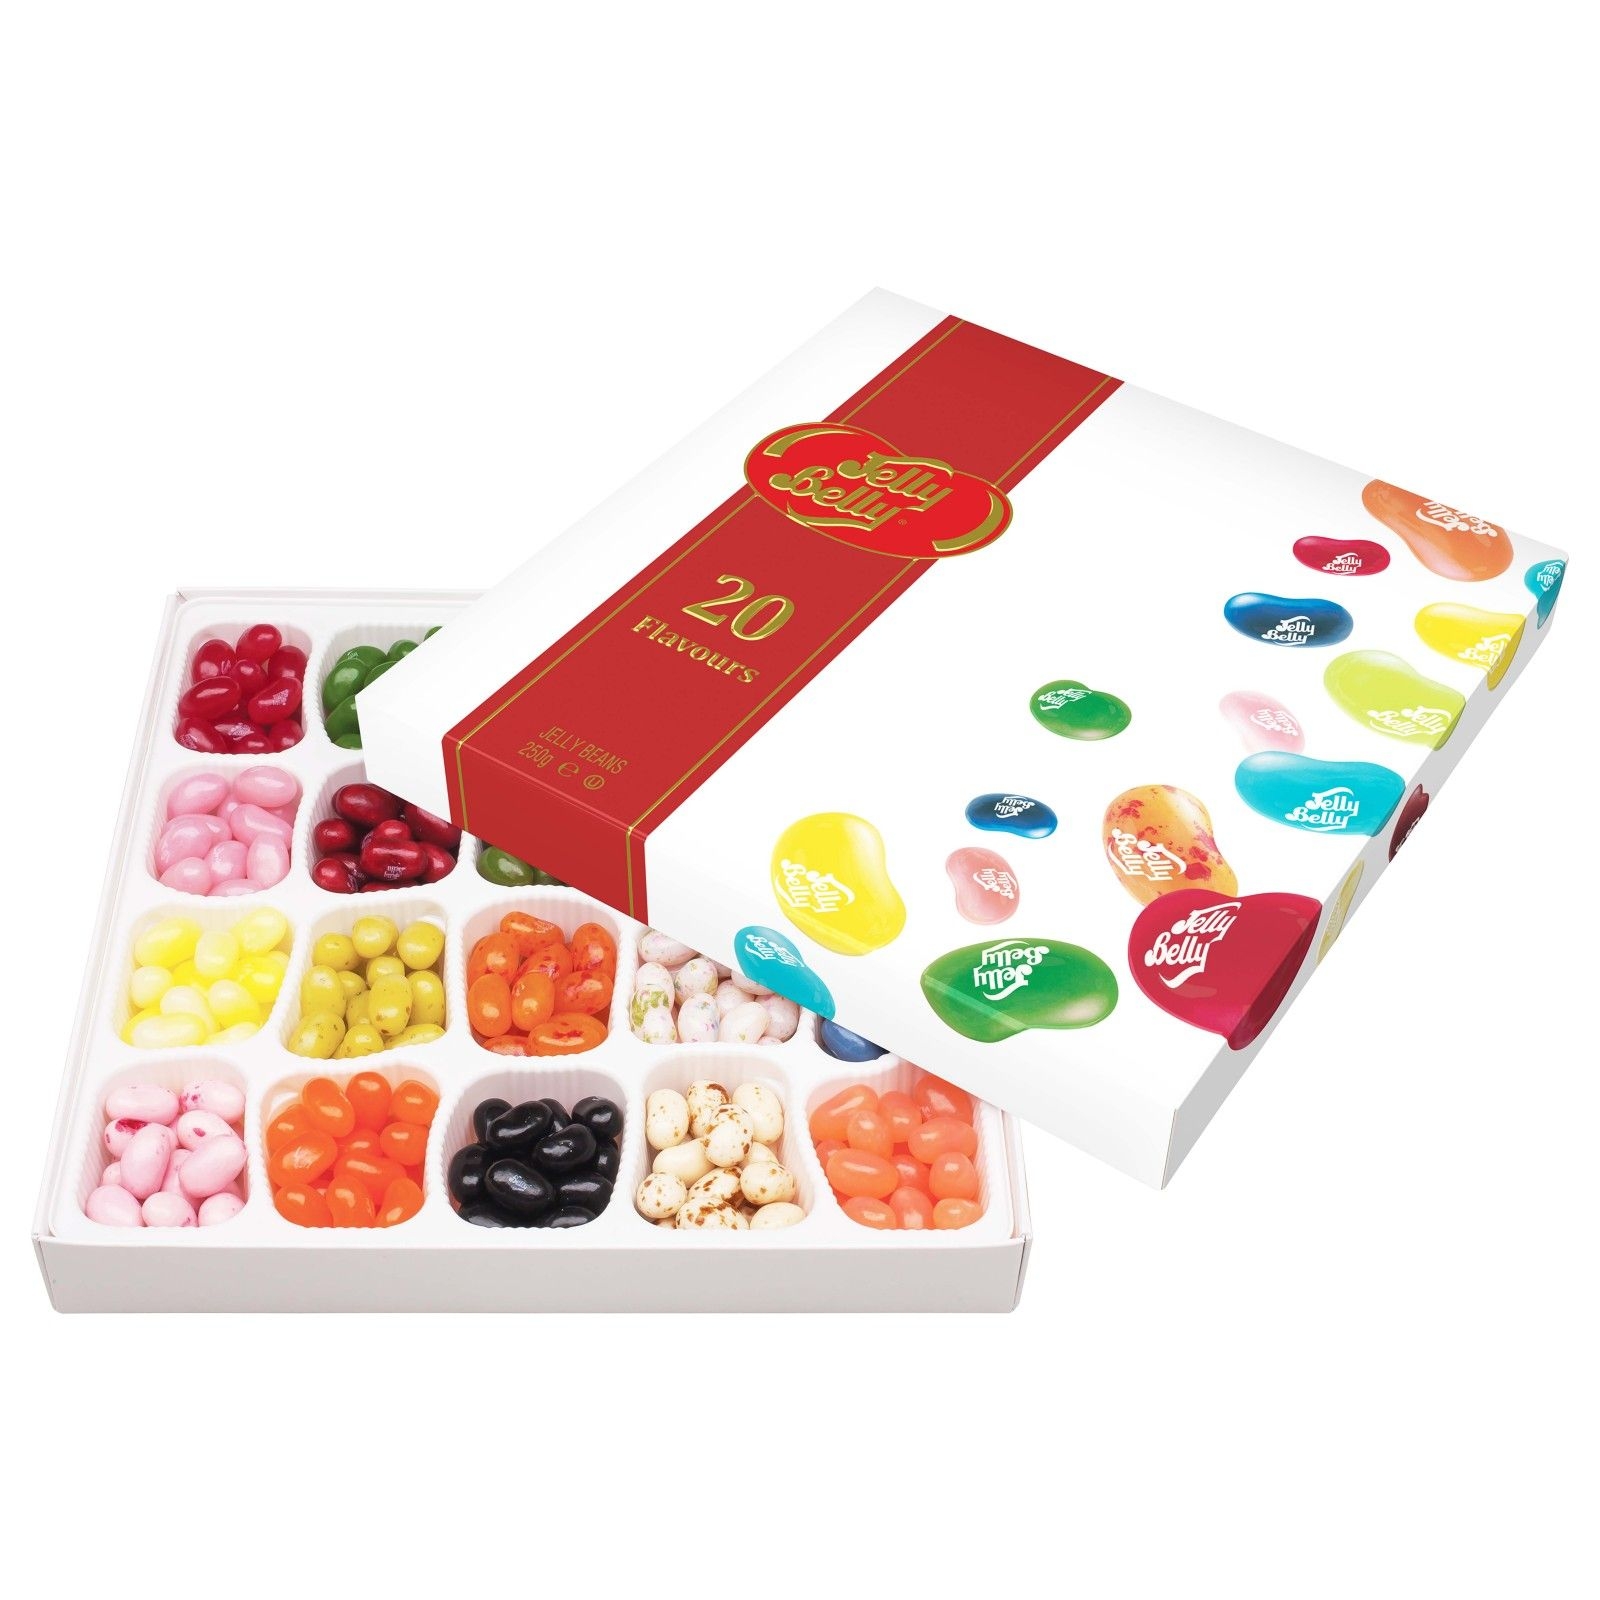 Jelly Belly Jelly Bean 20 Individual Flavours Gift Box 250g – Confection Affection